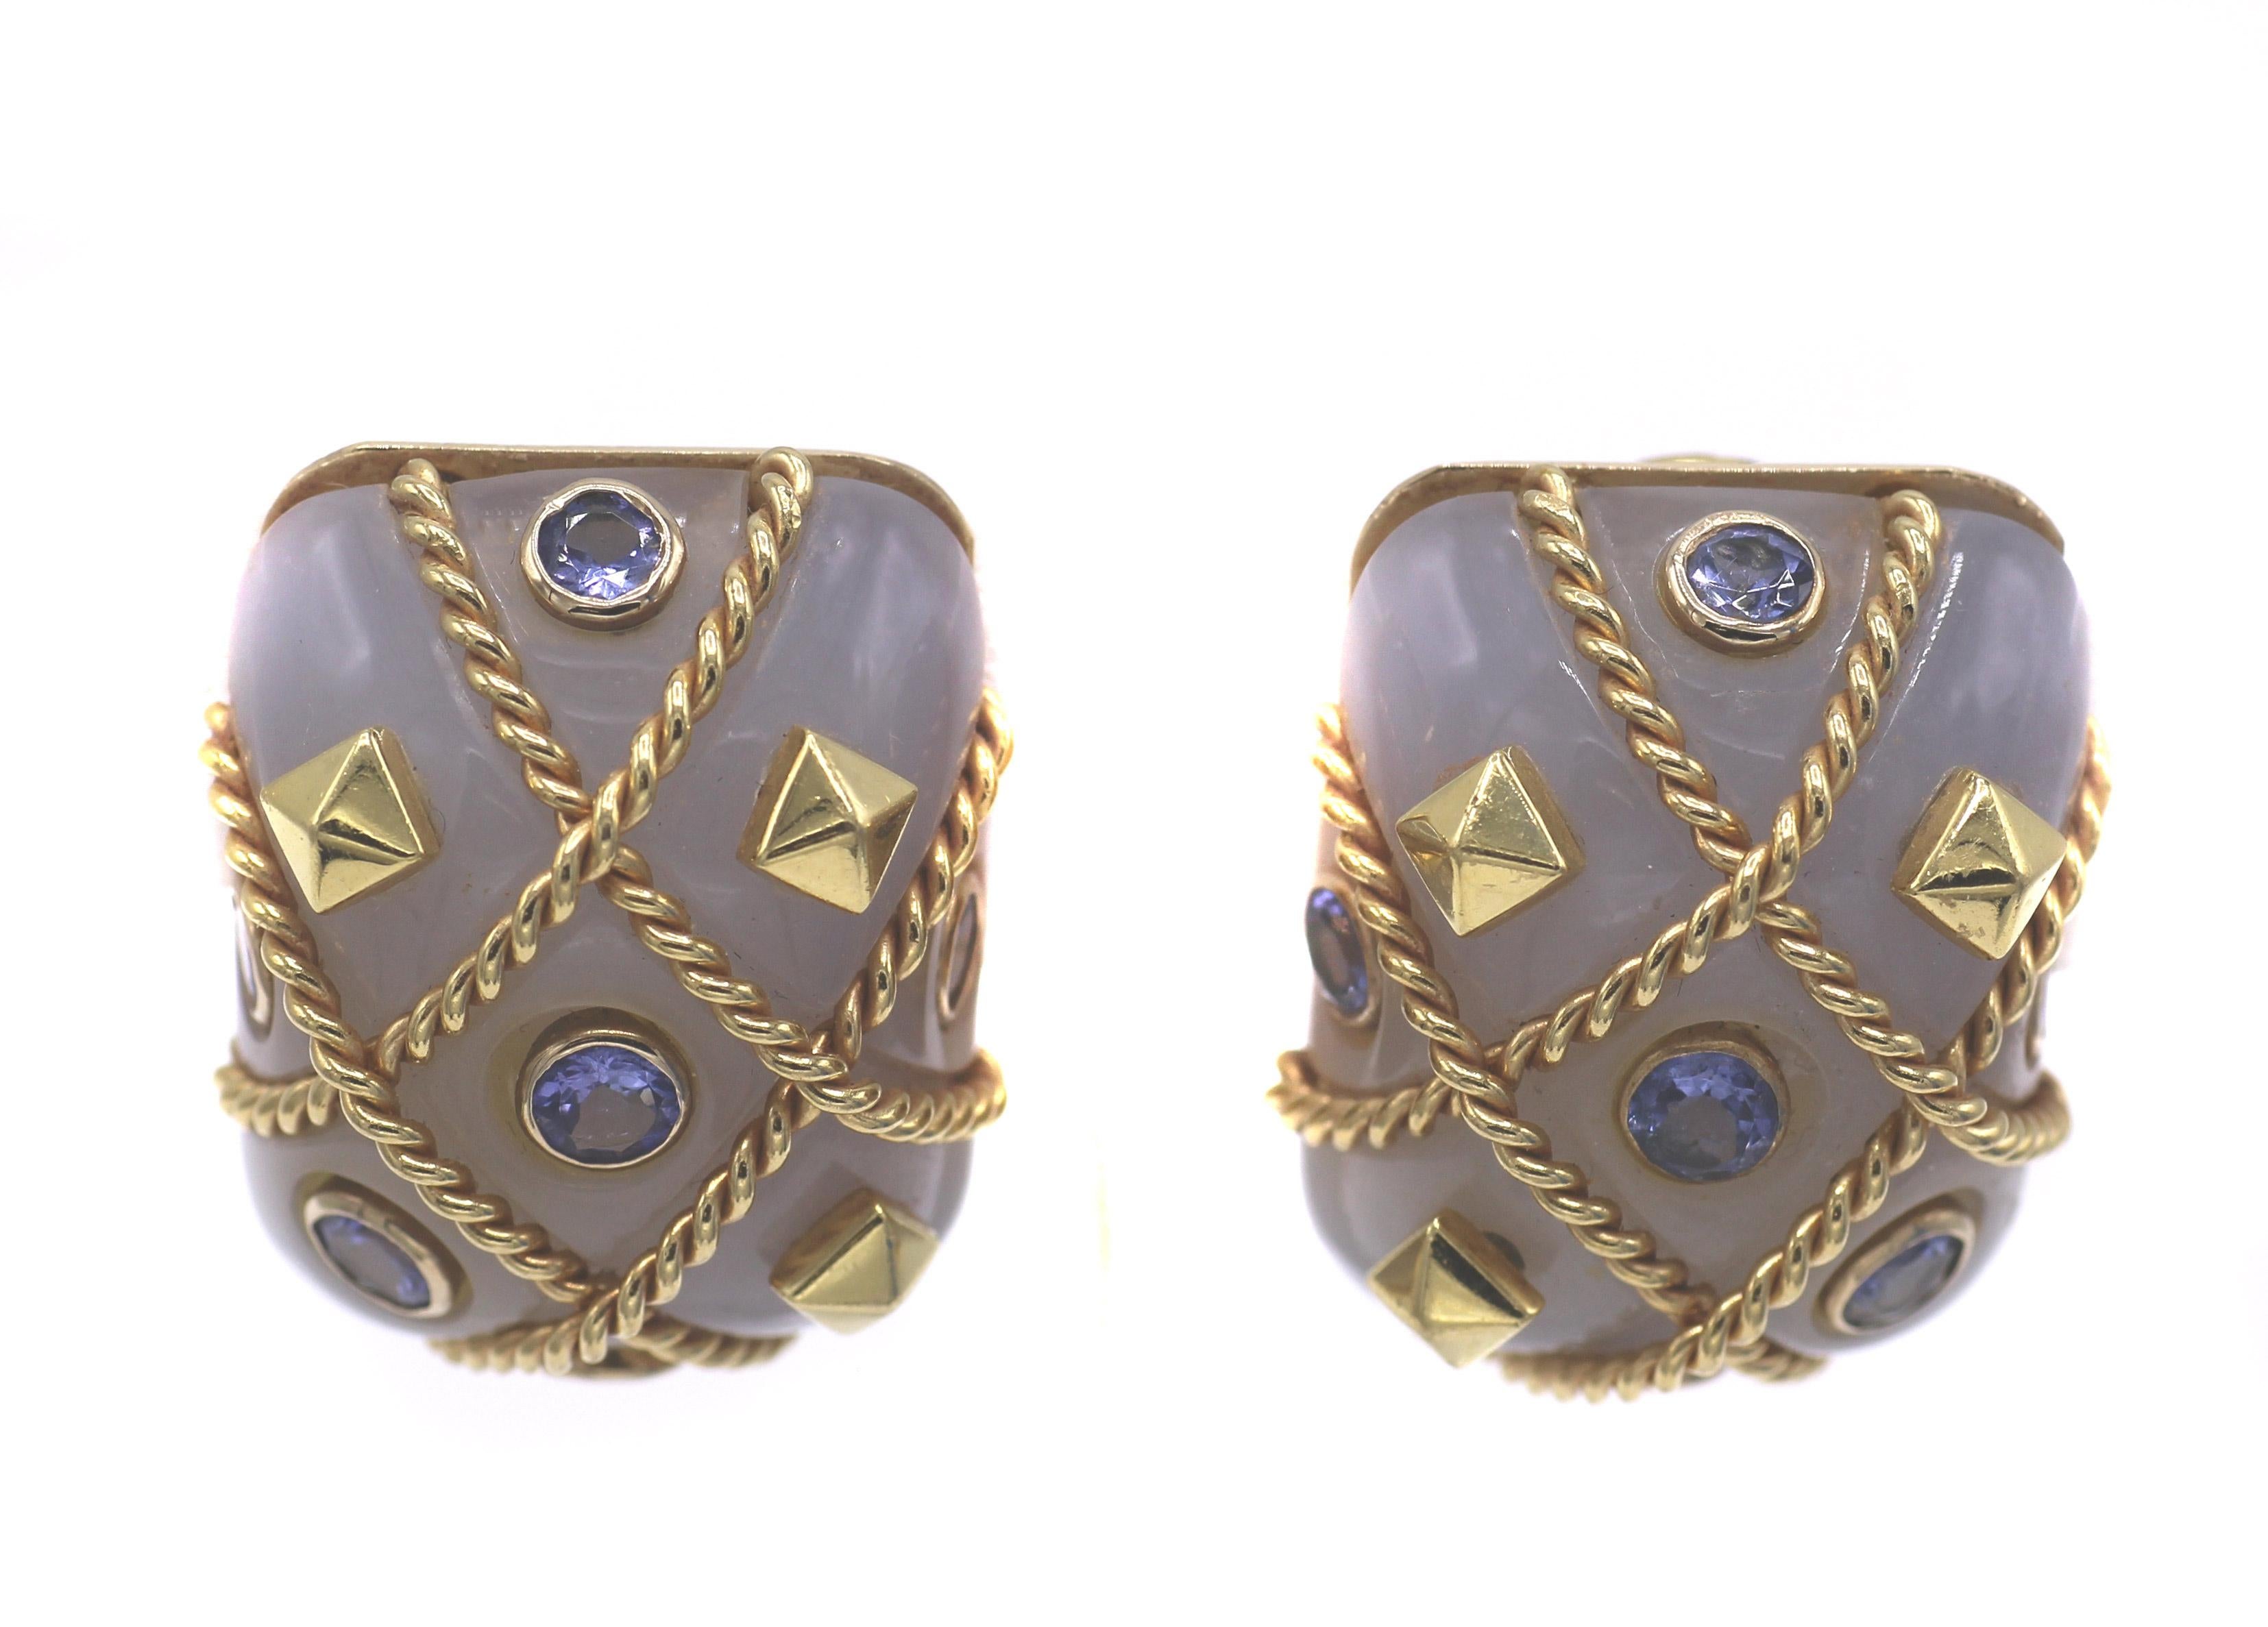 Bold, chic and beautifully designed these 1980s ear clips are a fun wear for any occasion. Two perfectly matched rectangular Agate cabochons are studded with bezel set round sapphires and gold pyramids, in sections of braided gold bands. The cage